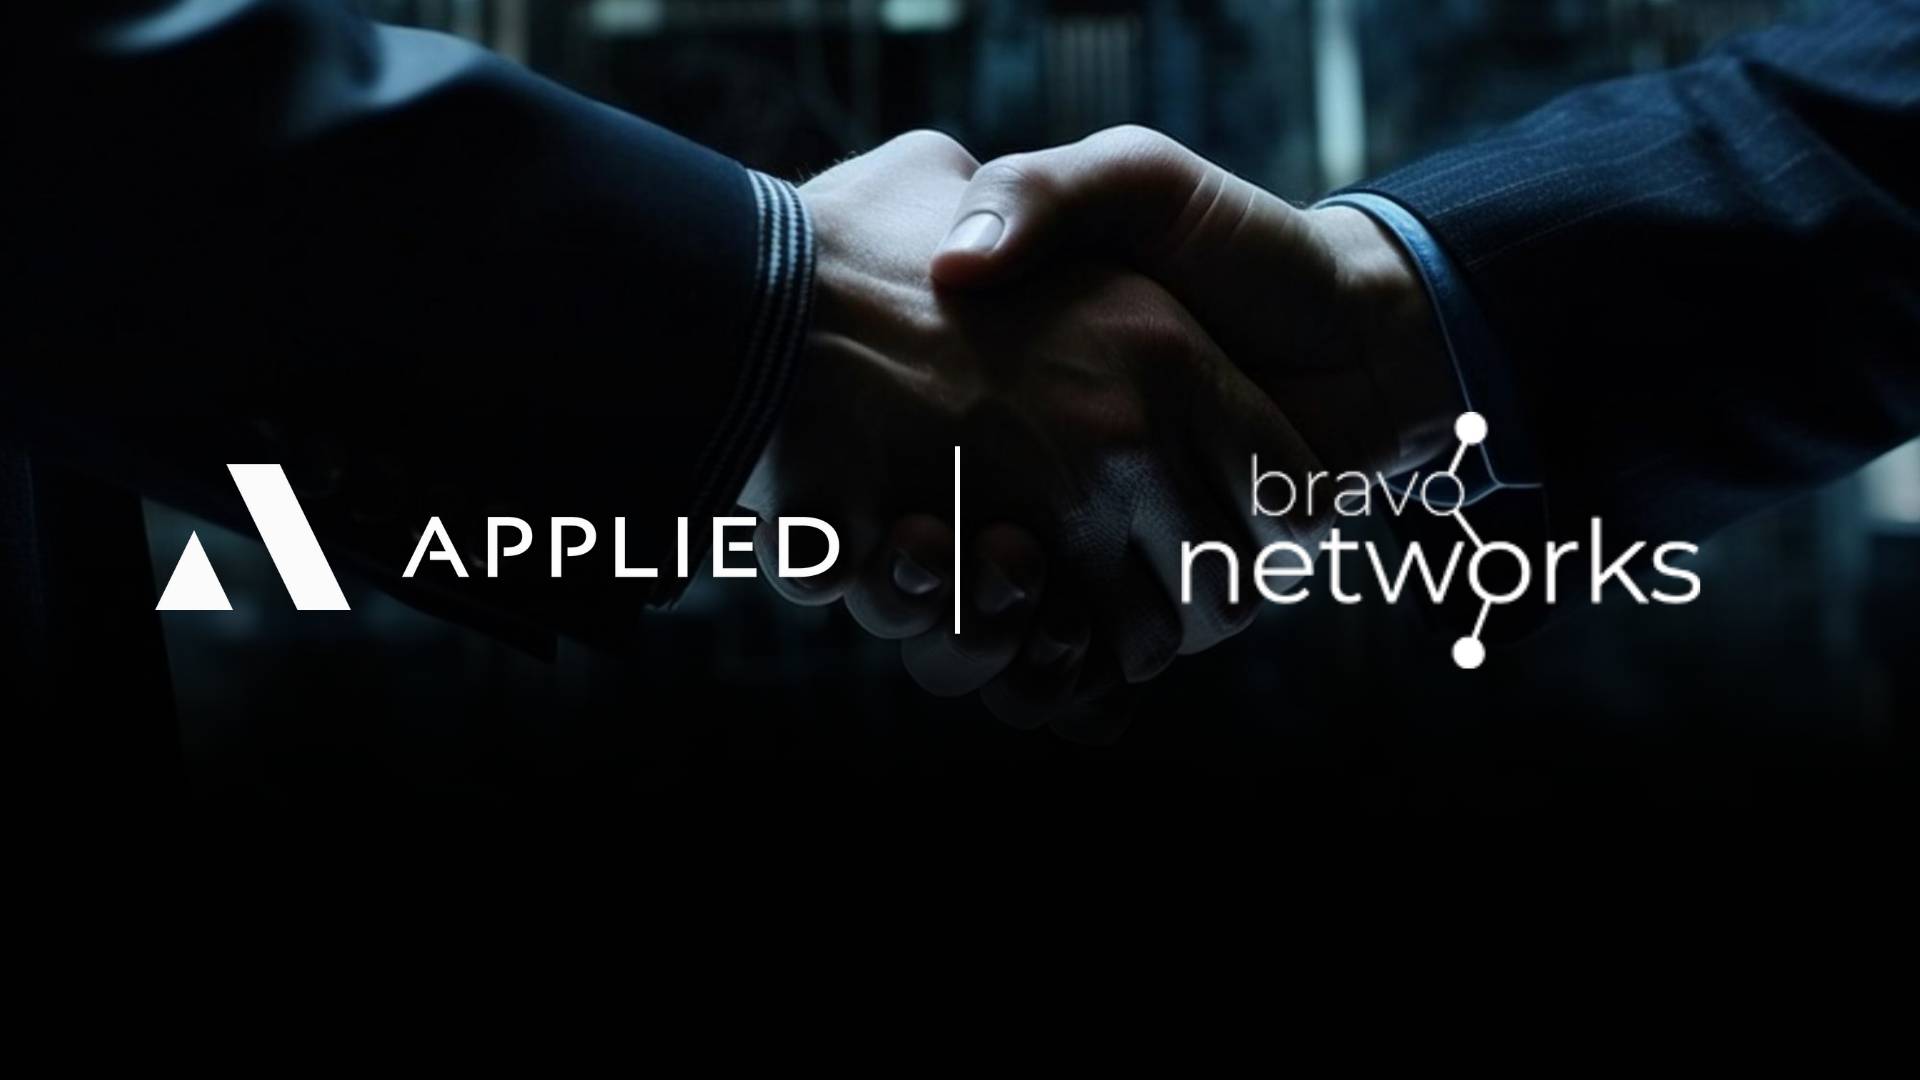 Applied Systems Europe Expands Partnership with Bravo Networks to Enhance Client Money Management for Applied Epic Brokers